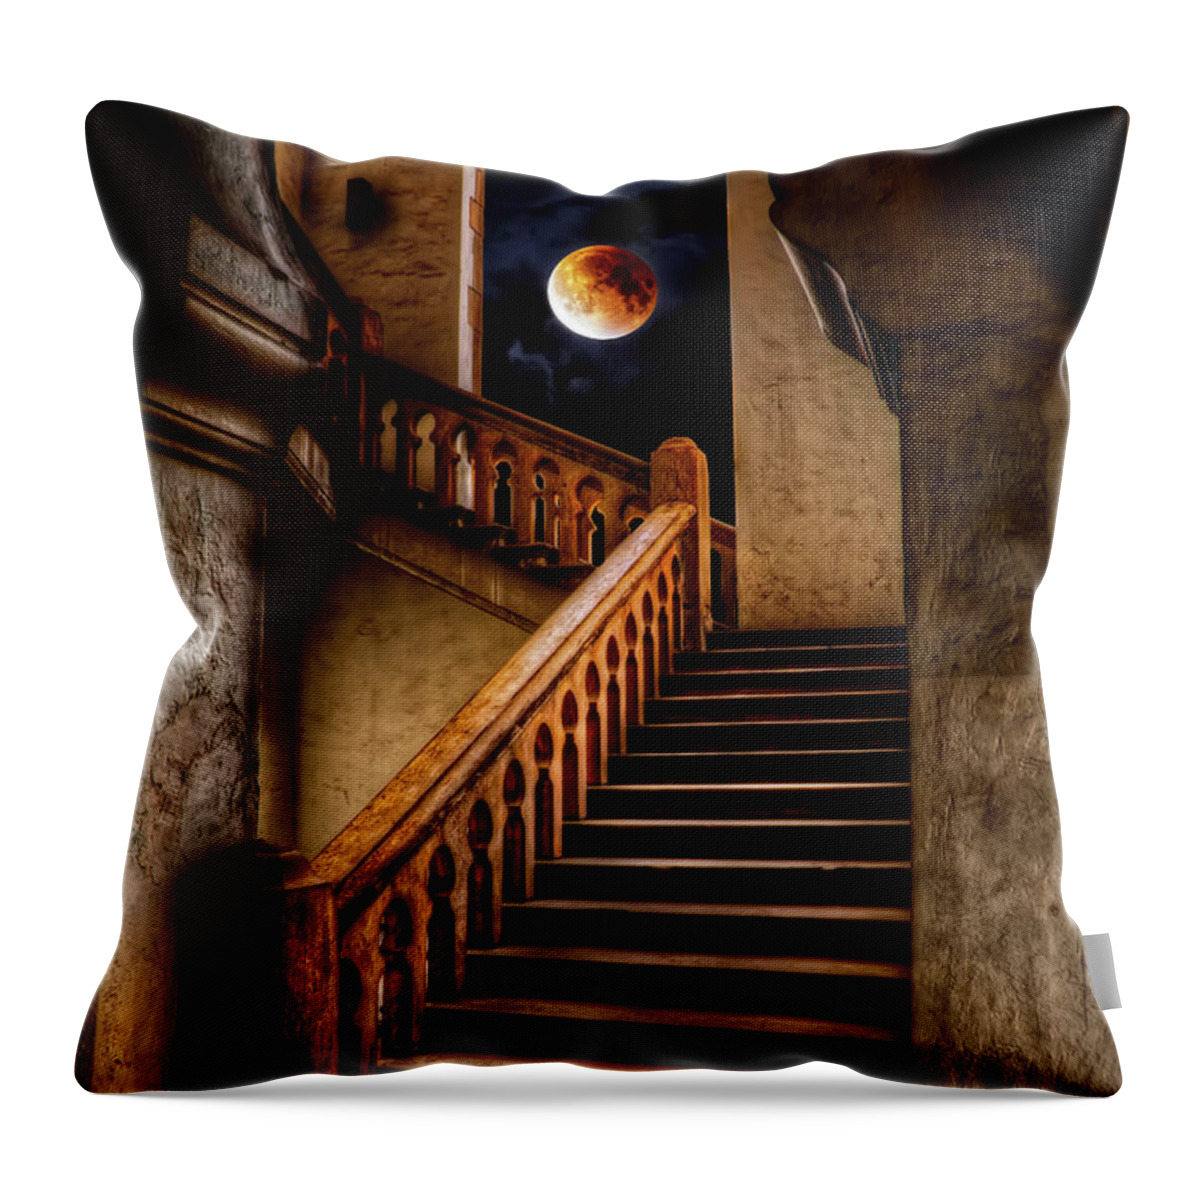 Kuala Lumpur Throw Pillow featuring the photograph KTM Stairway Moon by Adrian Evans